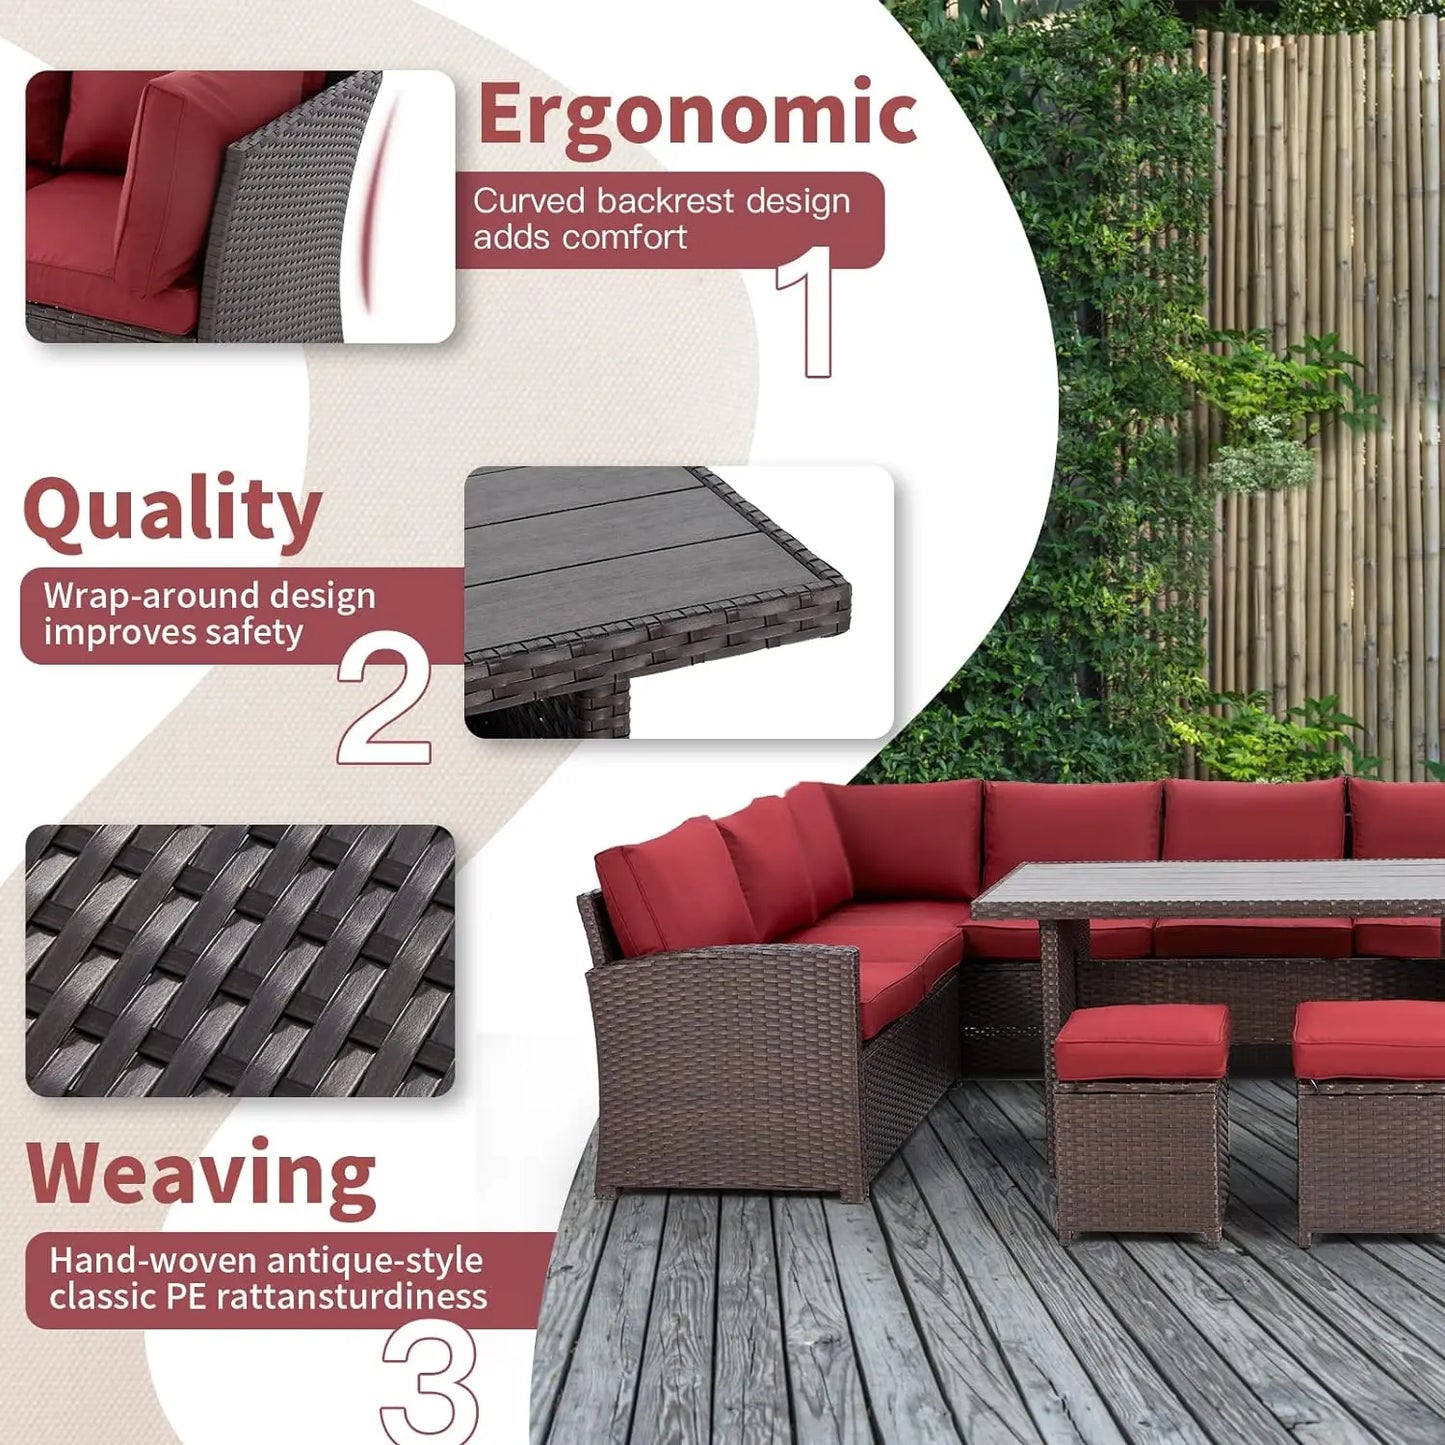 7 Pieces Outdoor All Weather Wicker Conversation Set with Ottoman